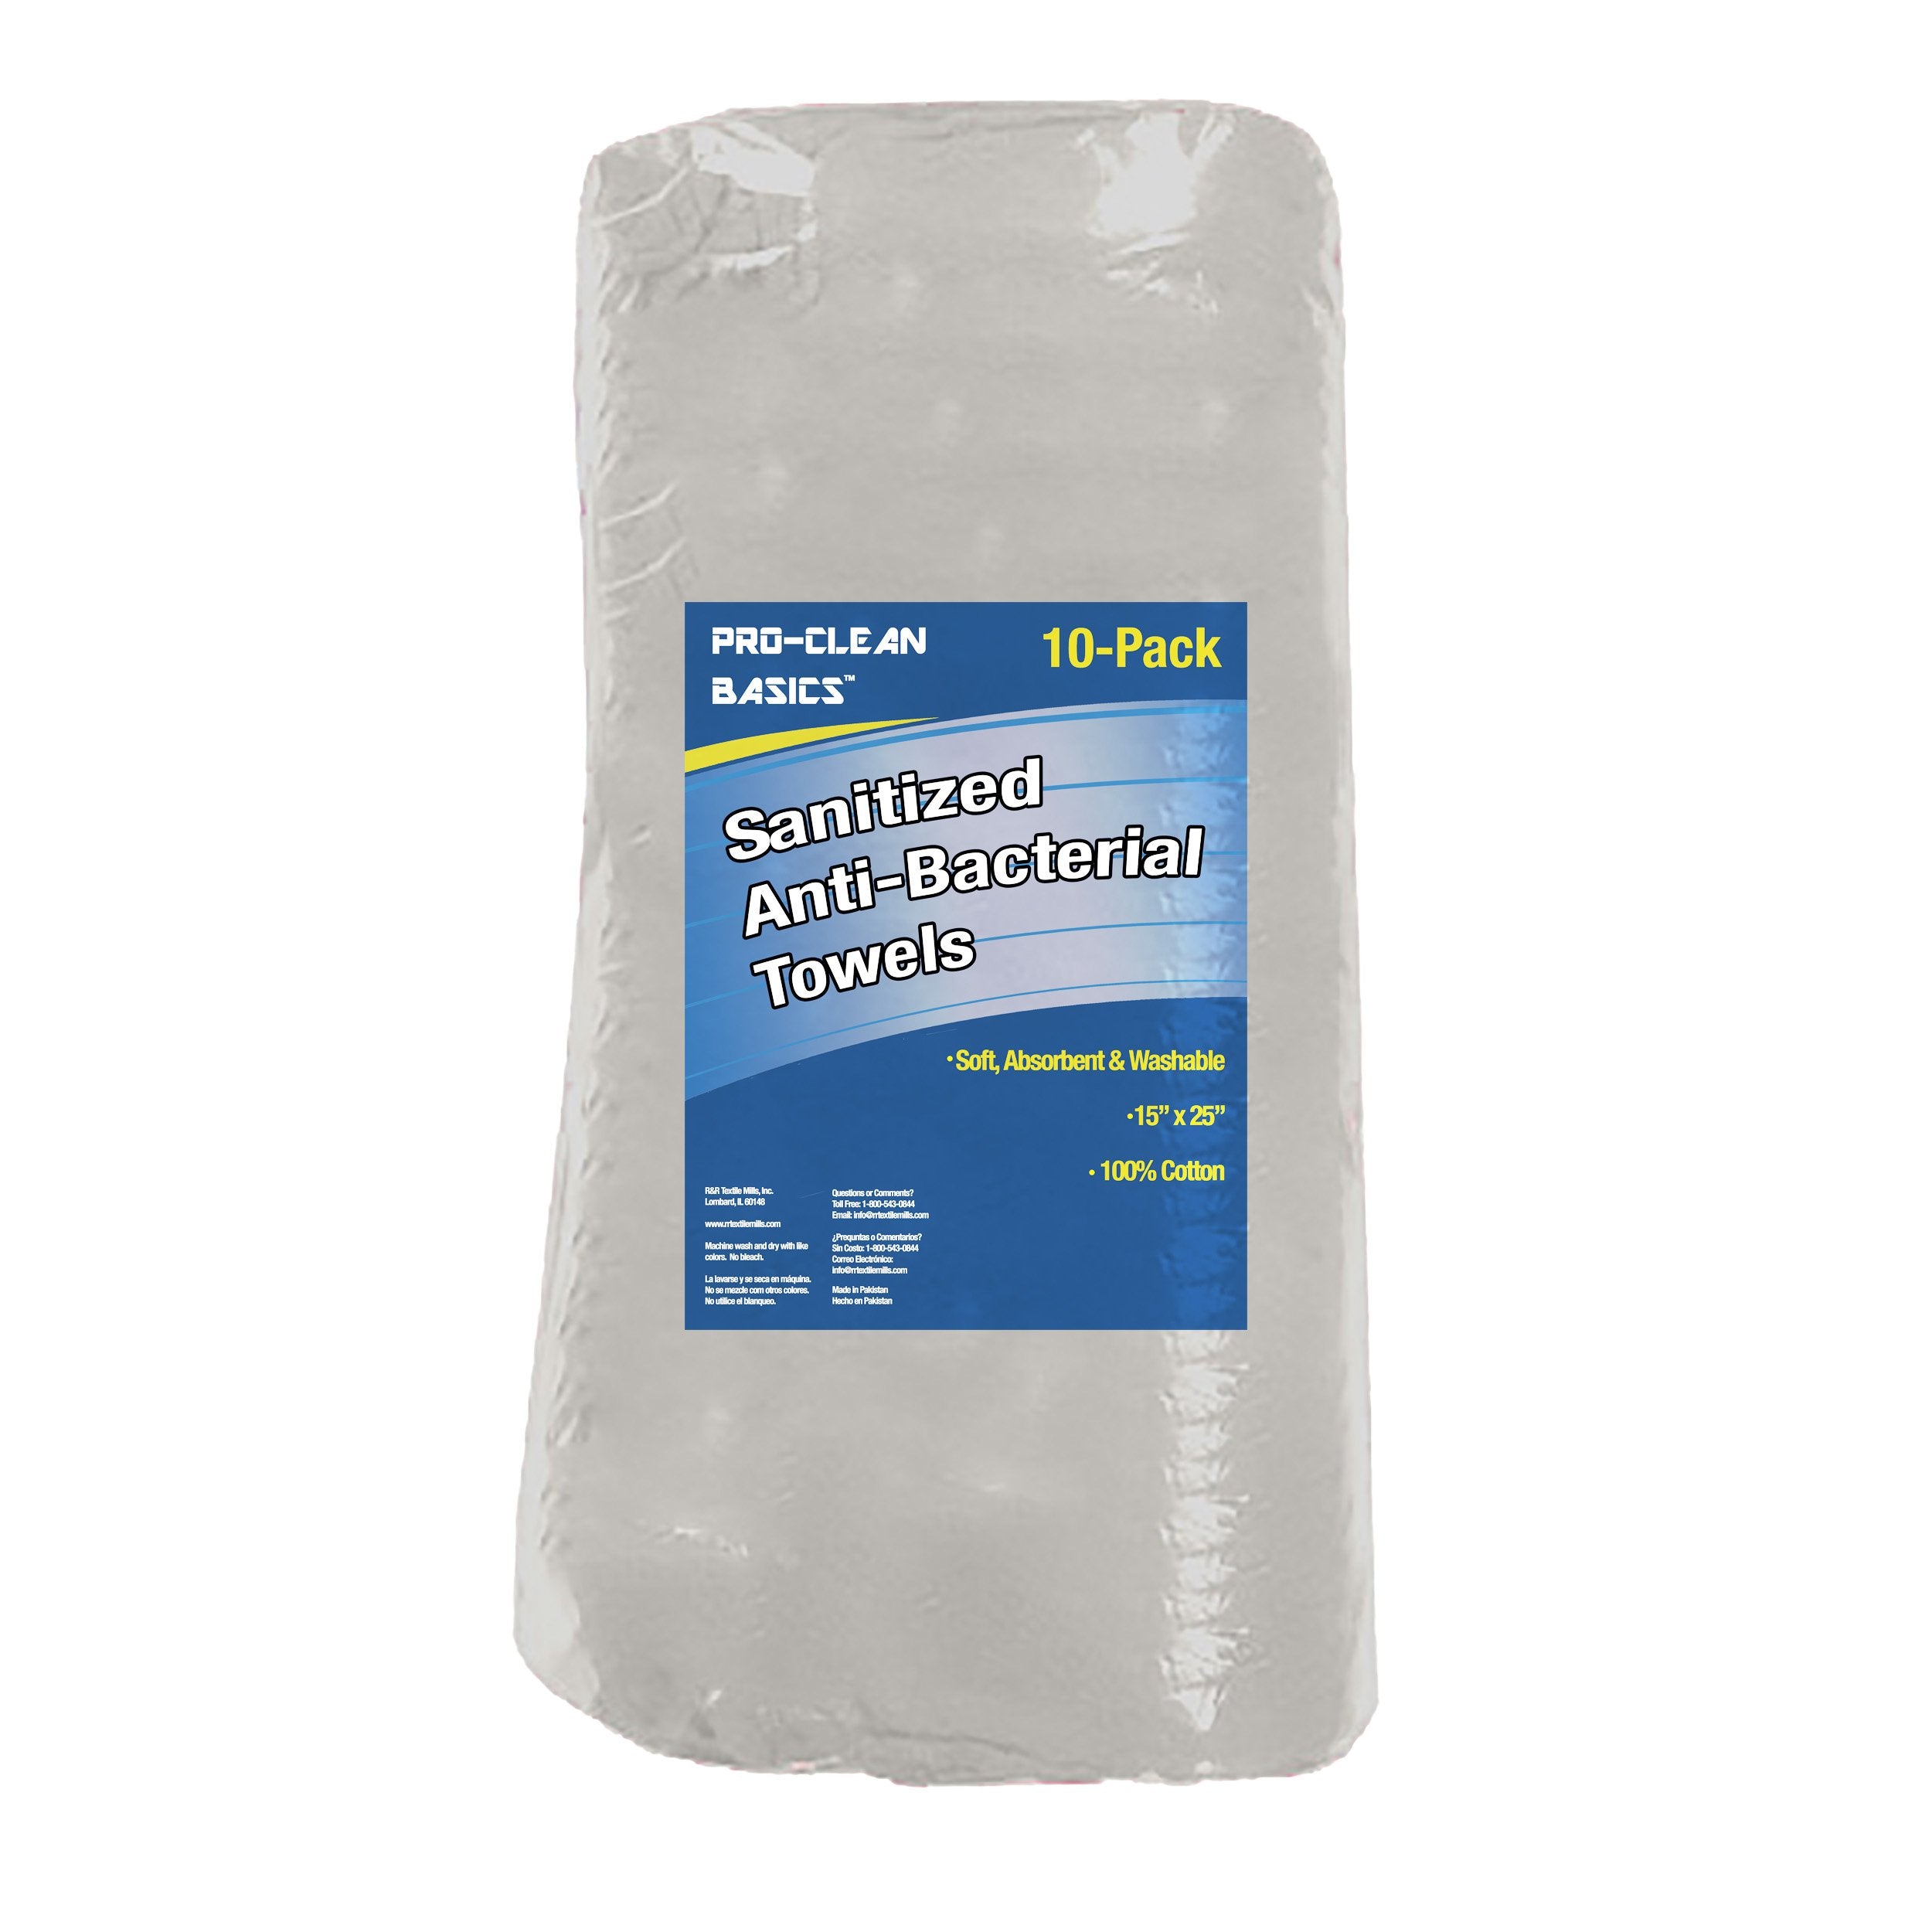 Pro-Clean Basics: Sanitized Anti-Bacterial White Wiping Towel, 15in x 25in